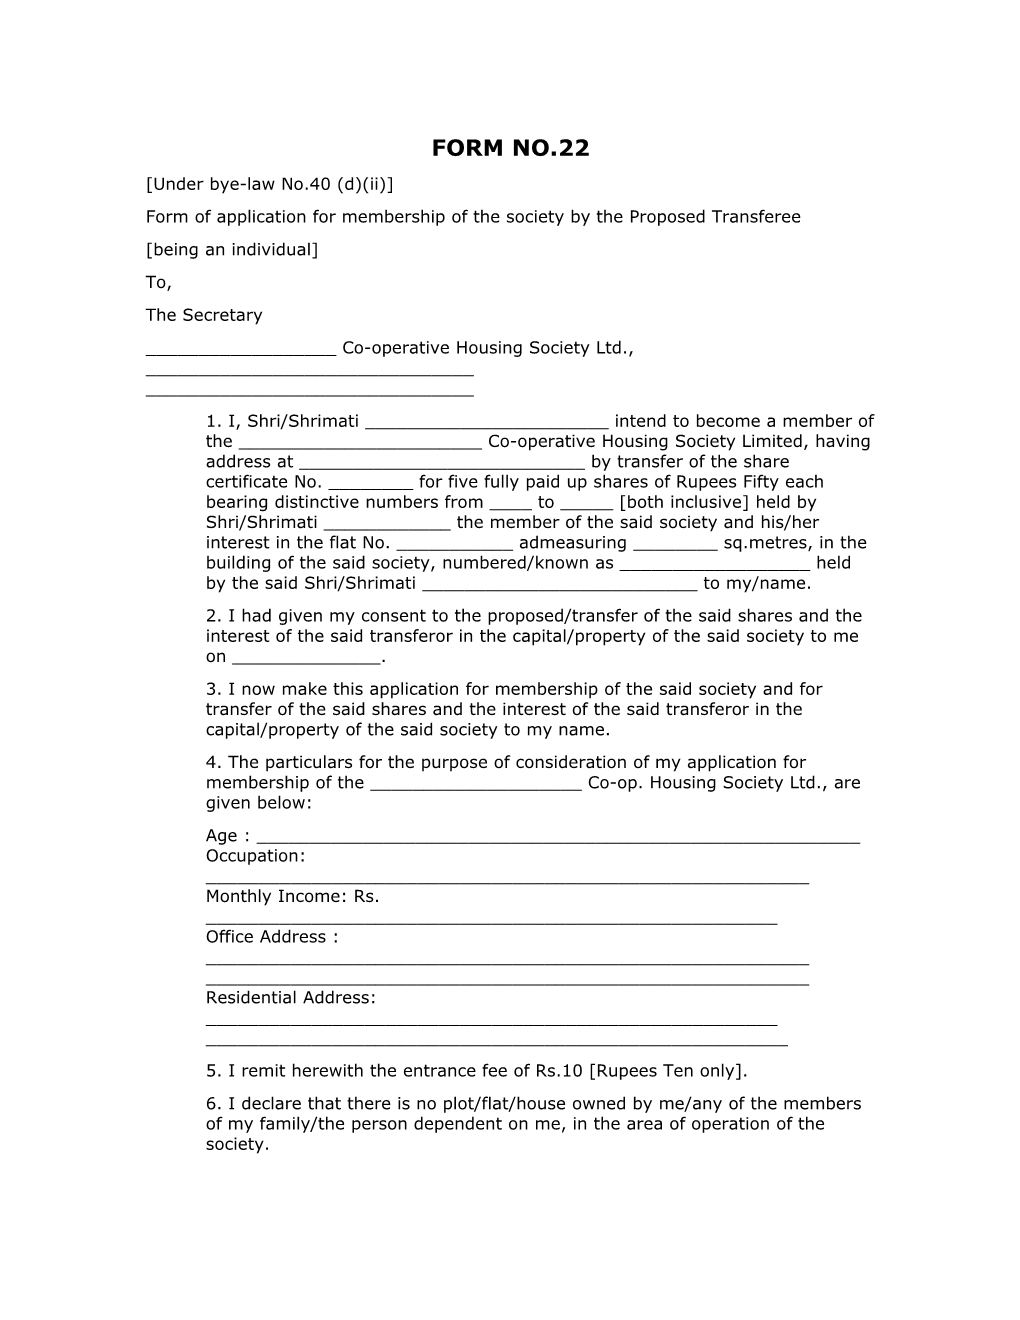 Form of Application for Membership of the Society by the Proposed Transferee